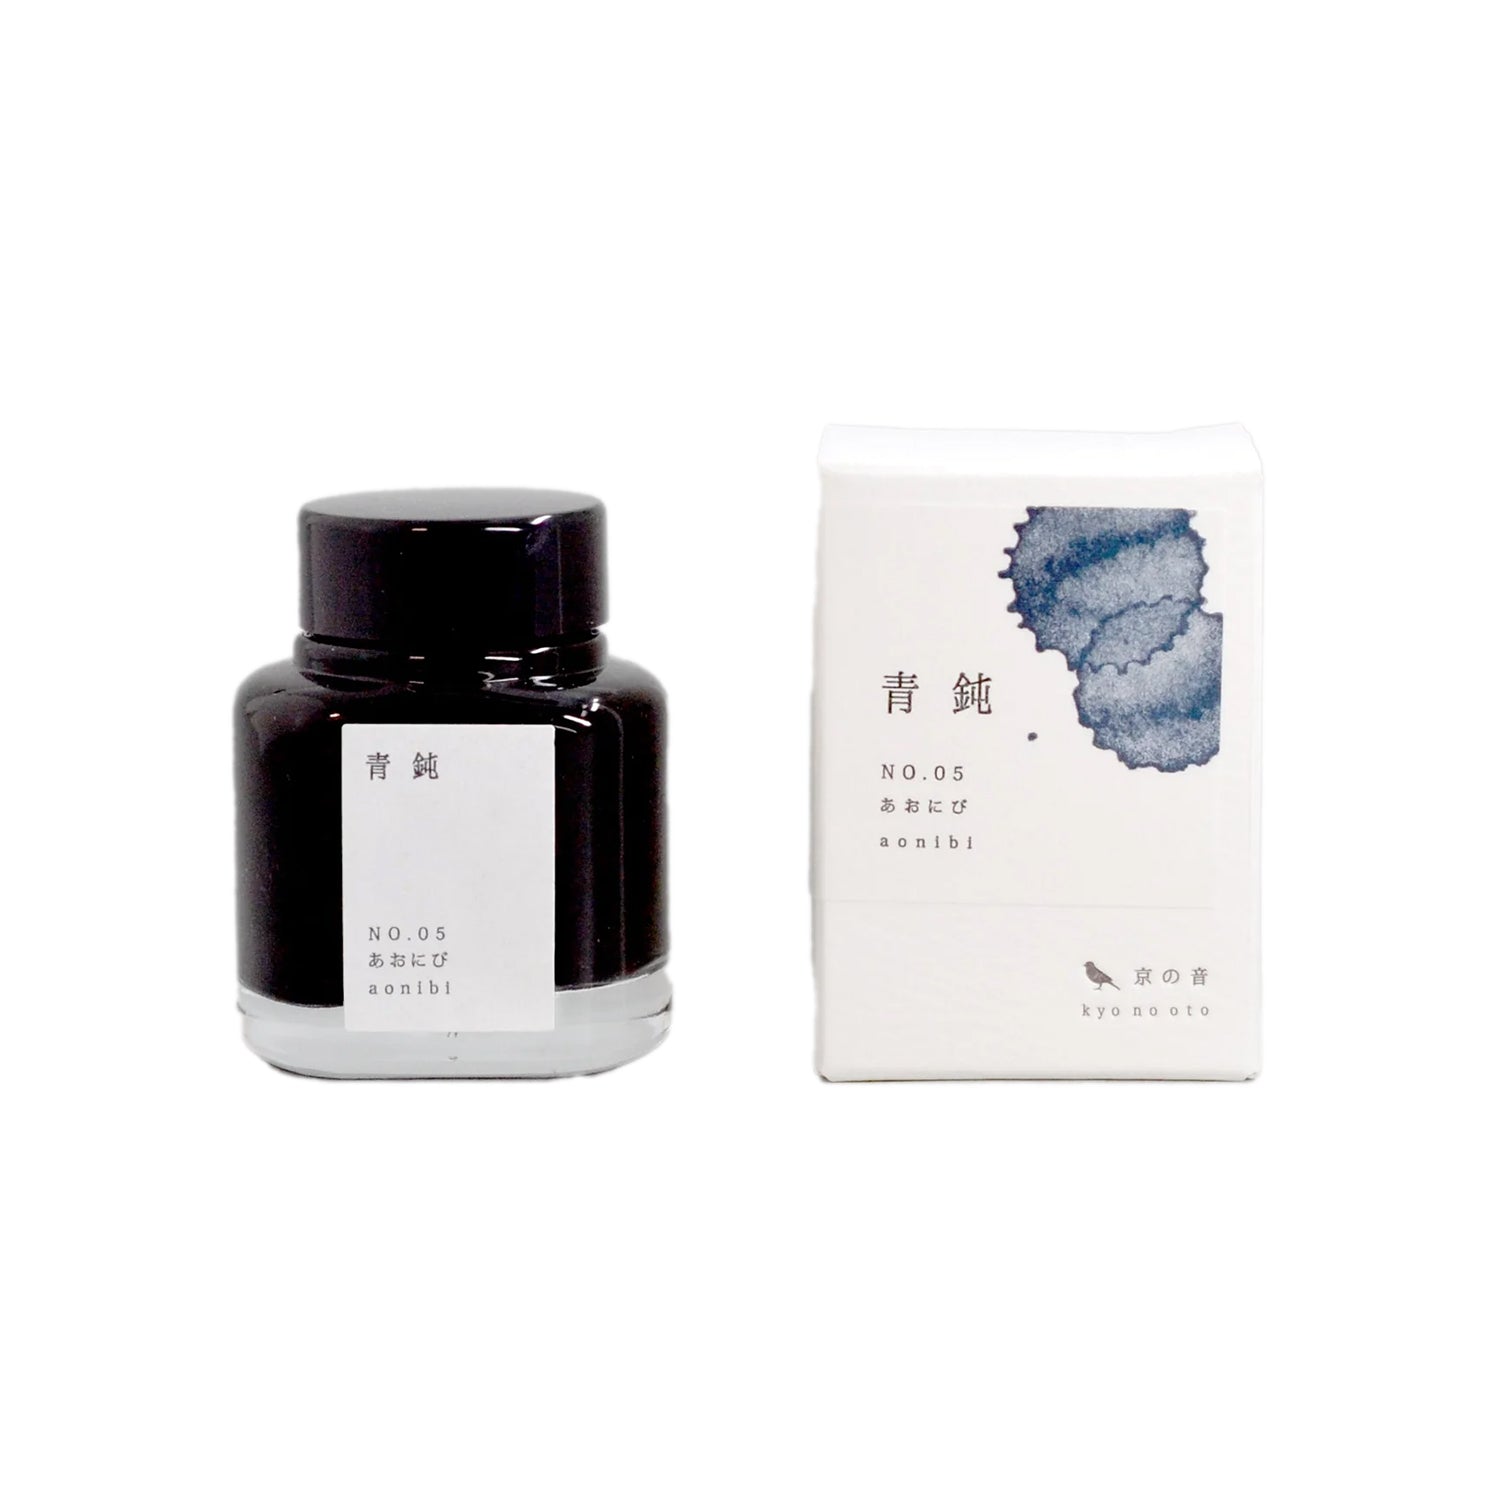 Tag Stationery Kyo No Oto Aonibi No. 5 Fountain Pen Ink - 40 ml Bottle Box